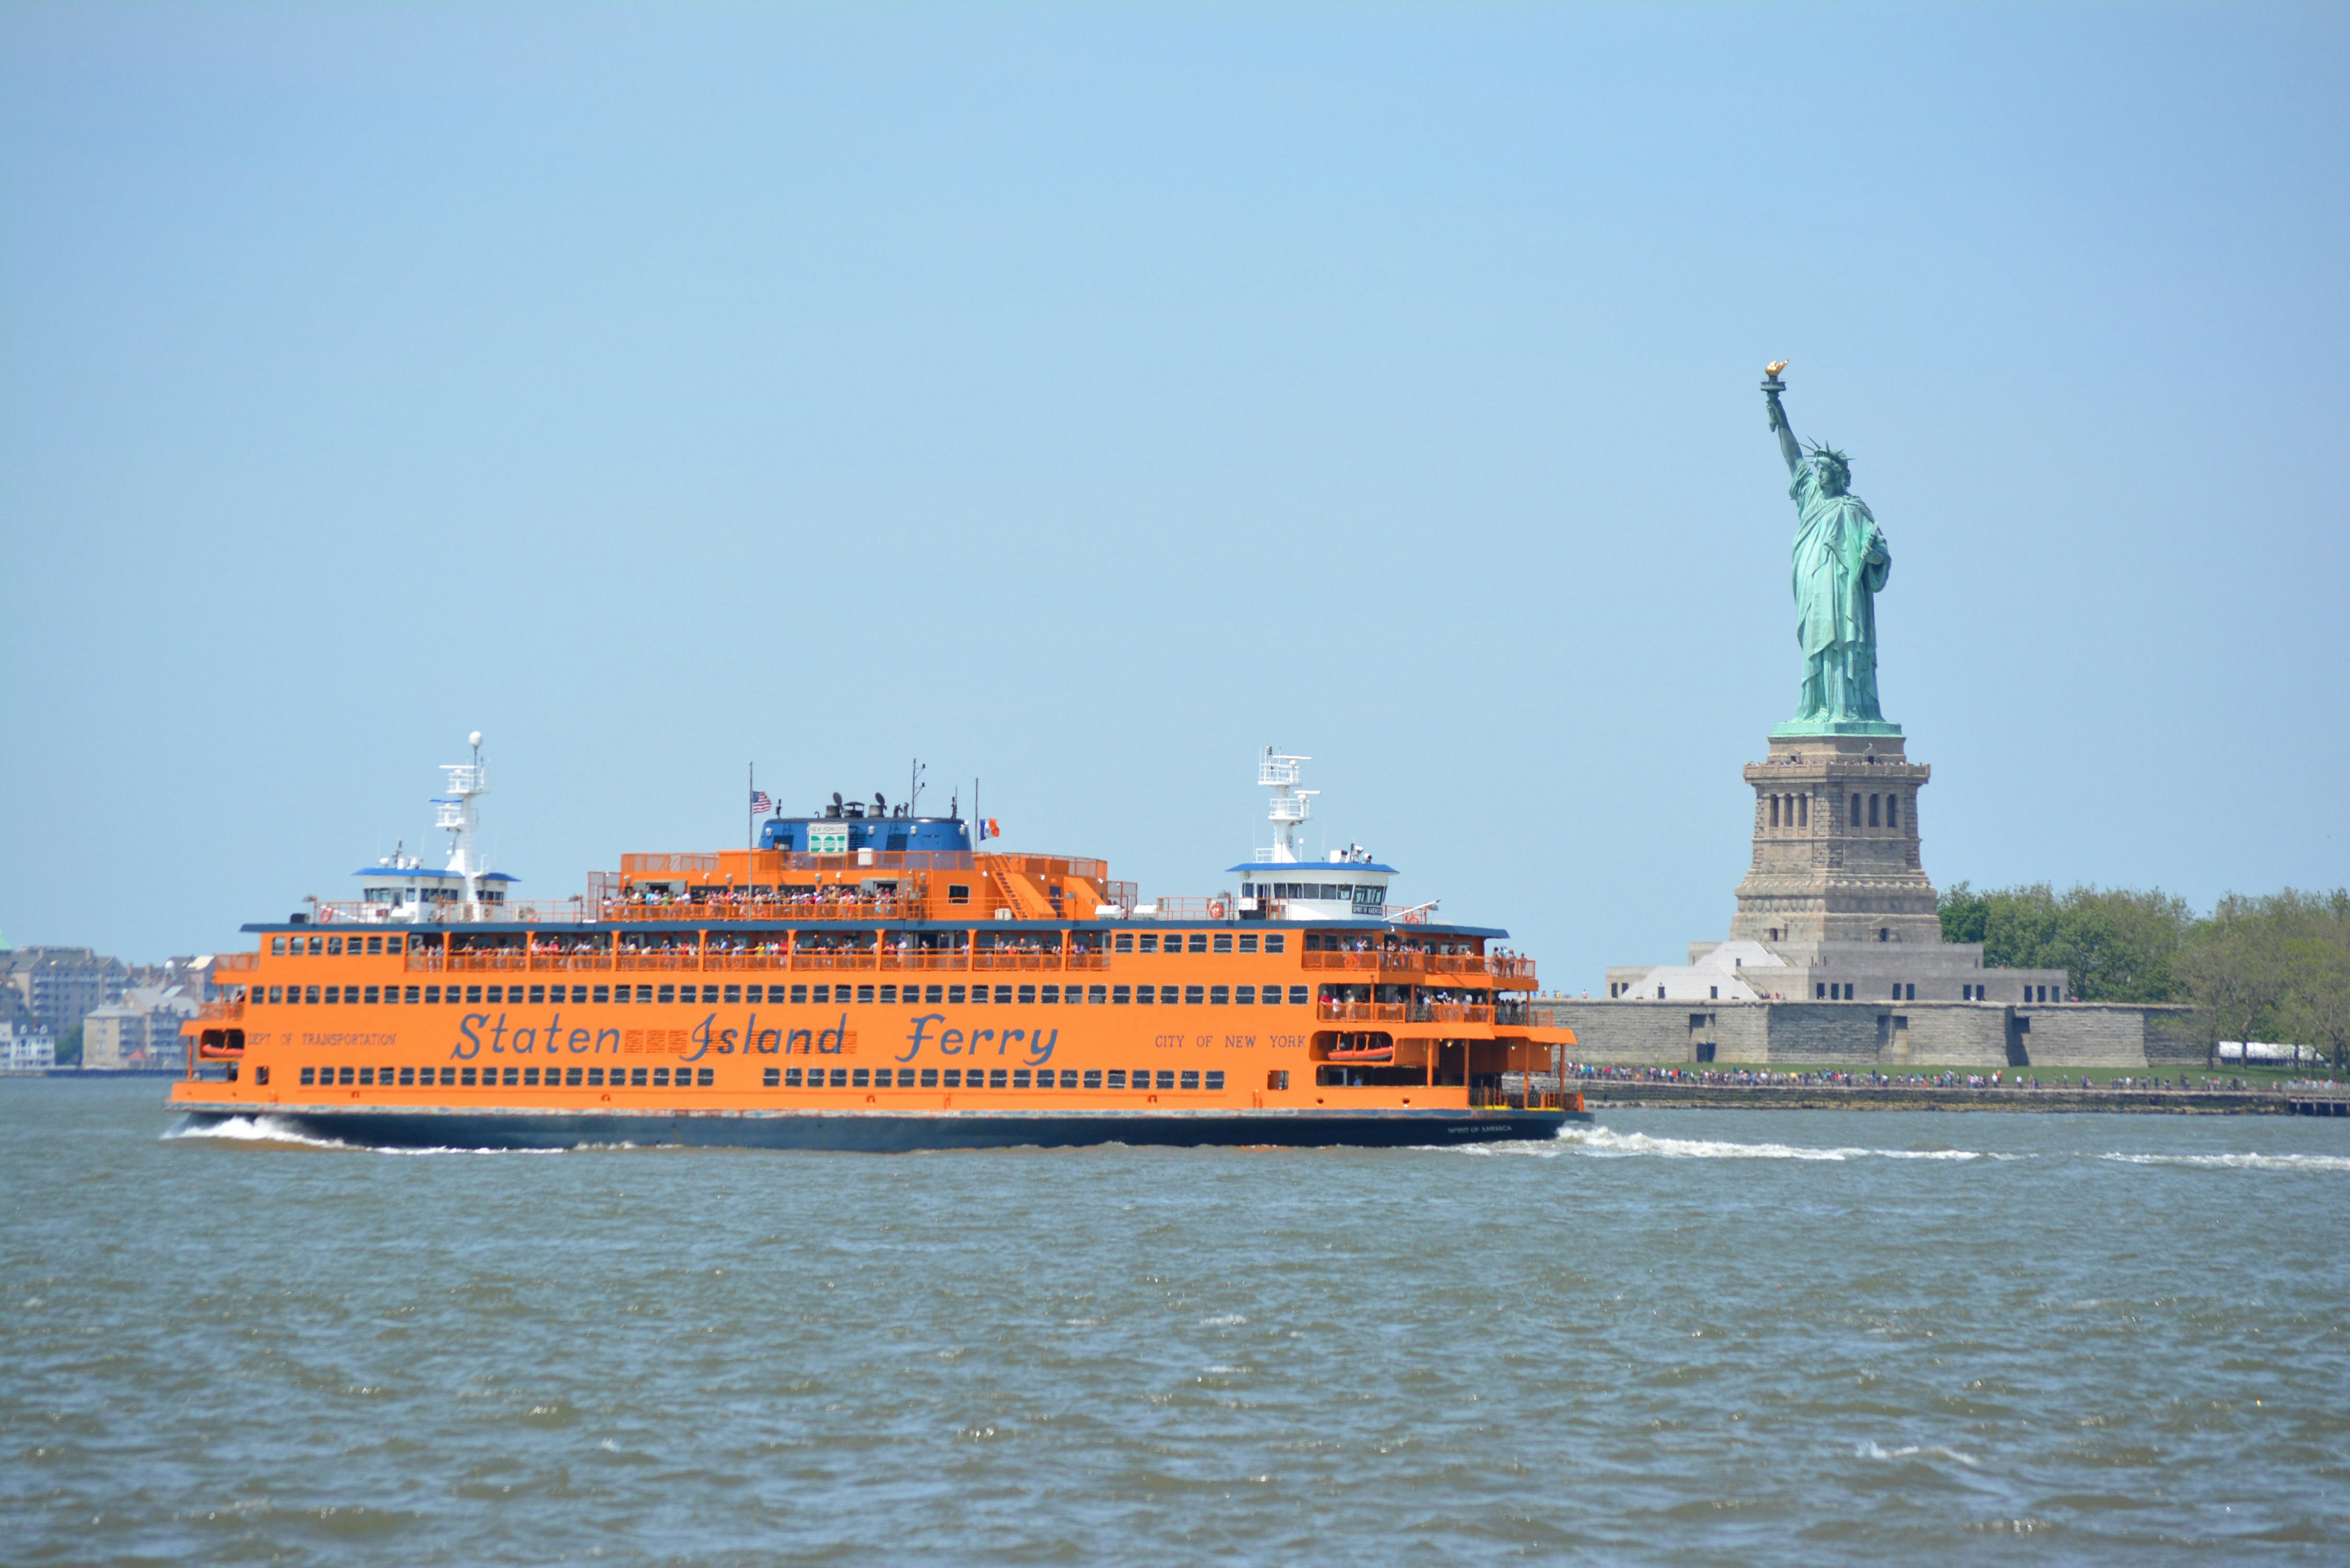 Statue of Liberty in New York Harbor